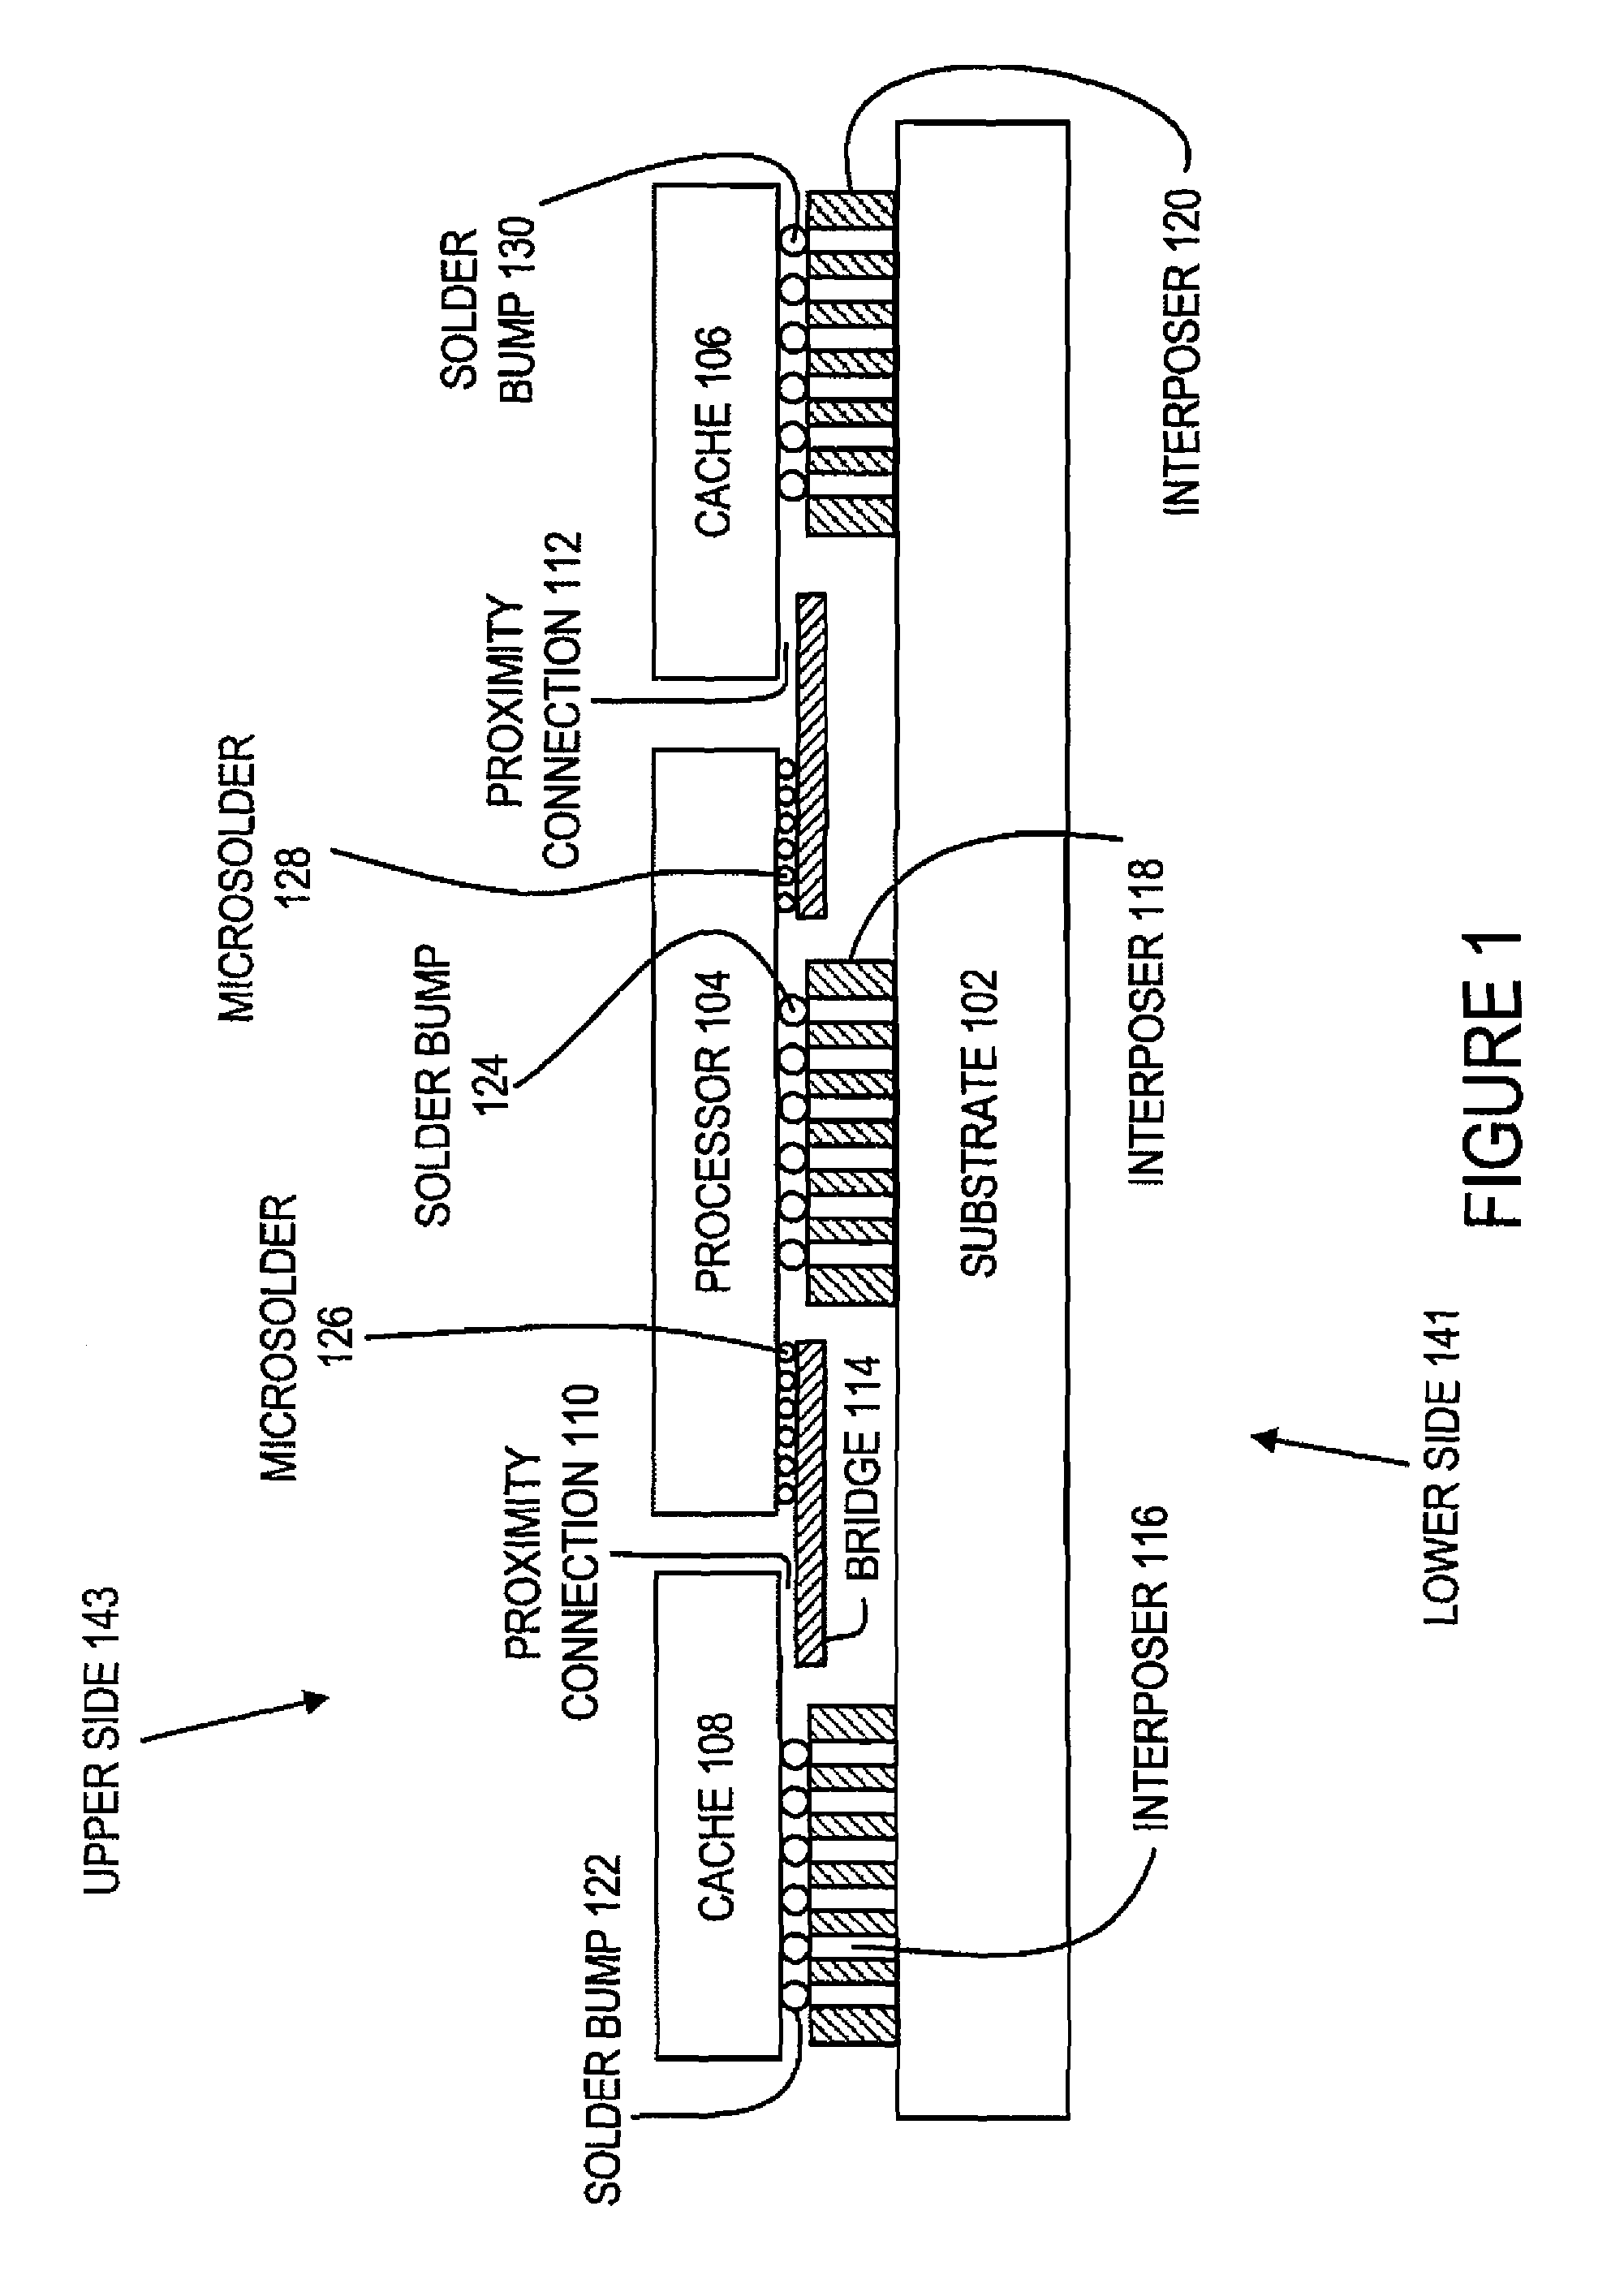 Proximity communication package for processor, cache and memory